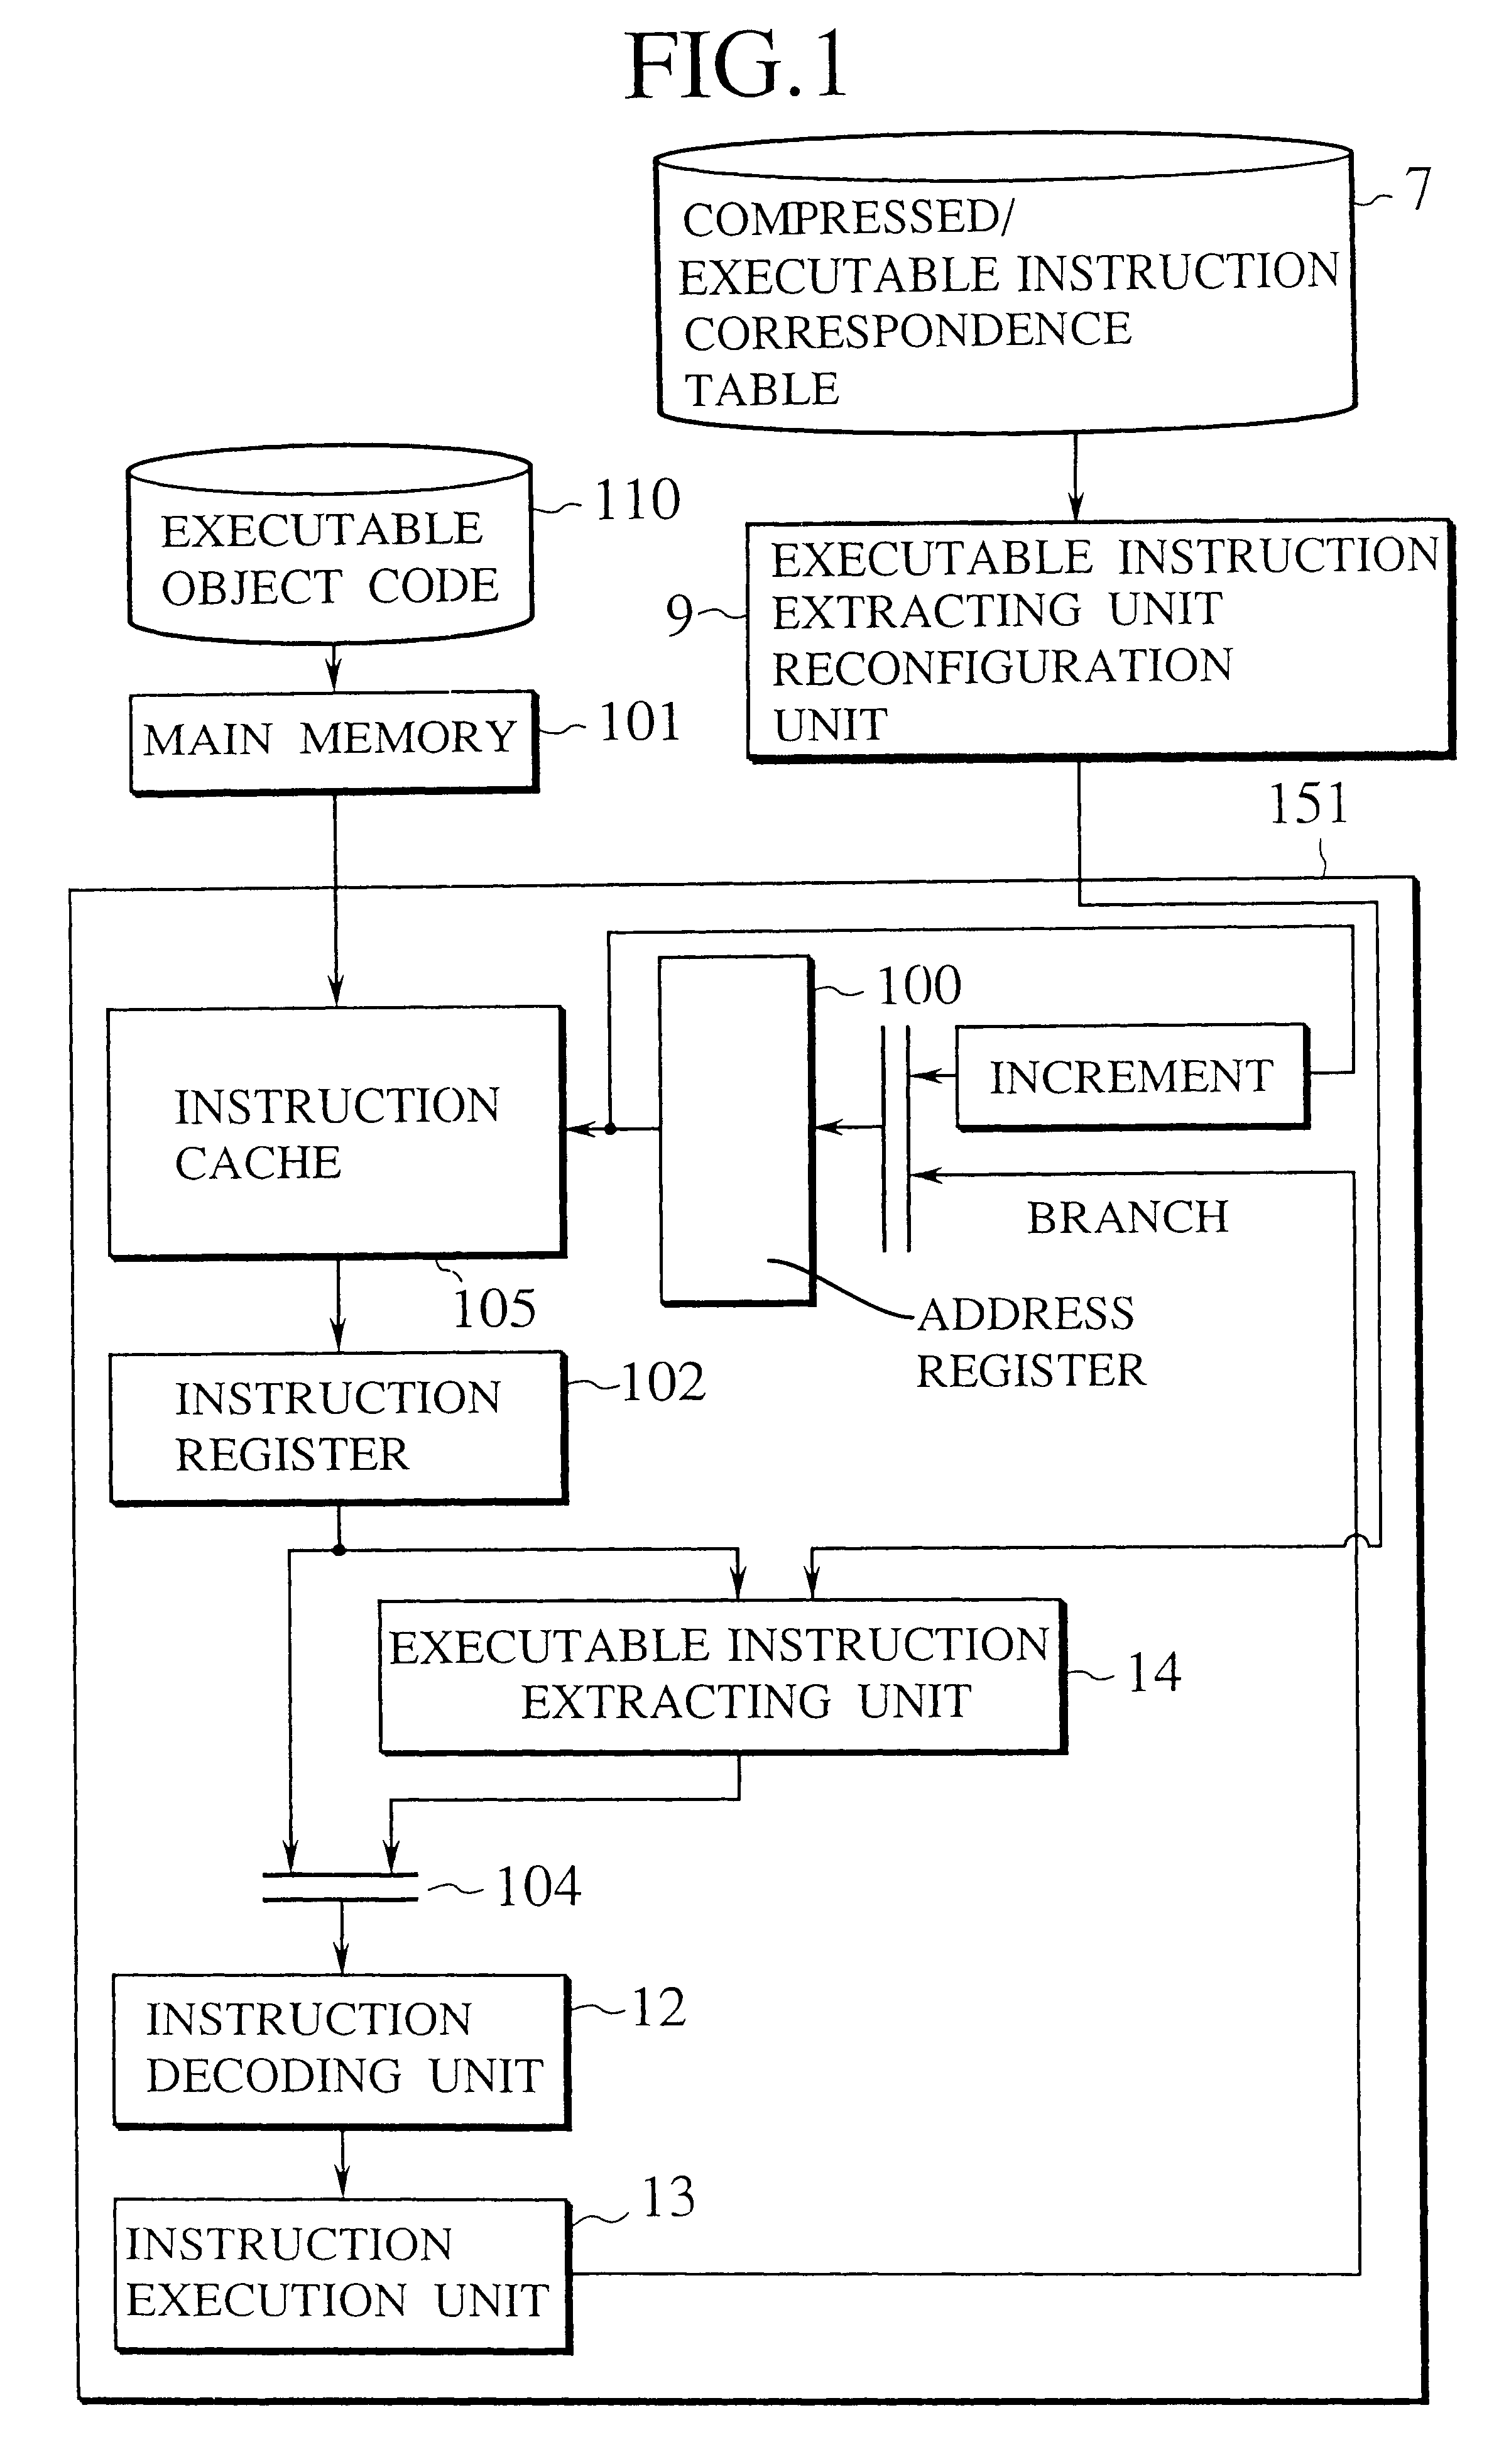 Information processing apparatus provided with an optimized executable instruction extracting unit for extending compressed instructions